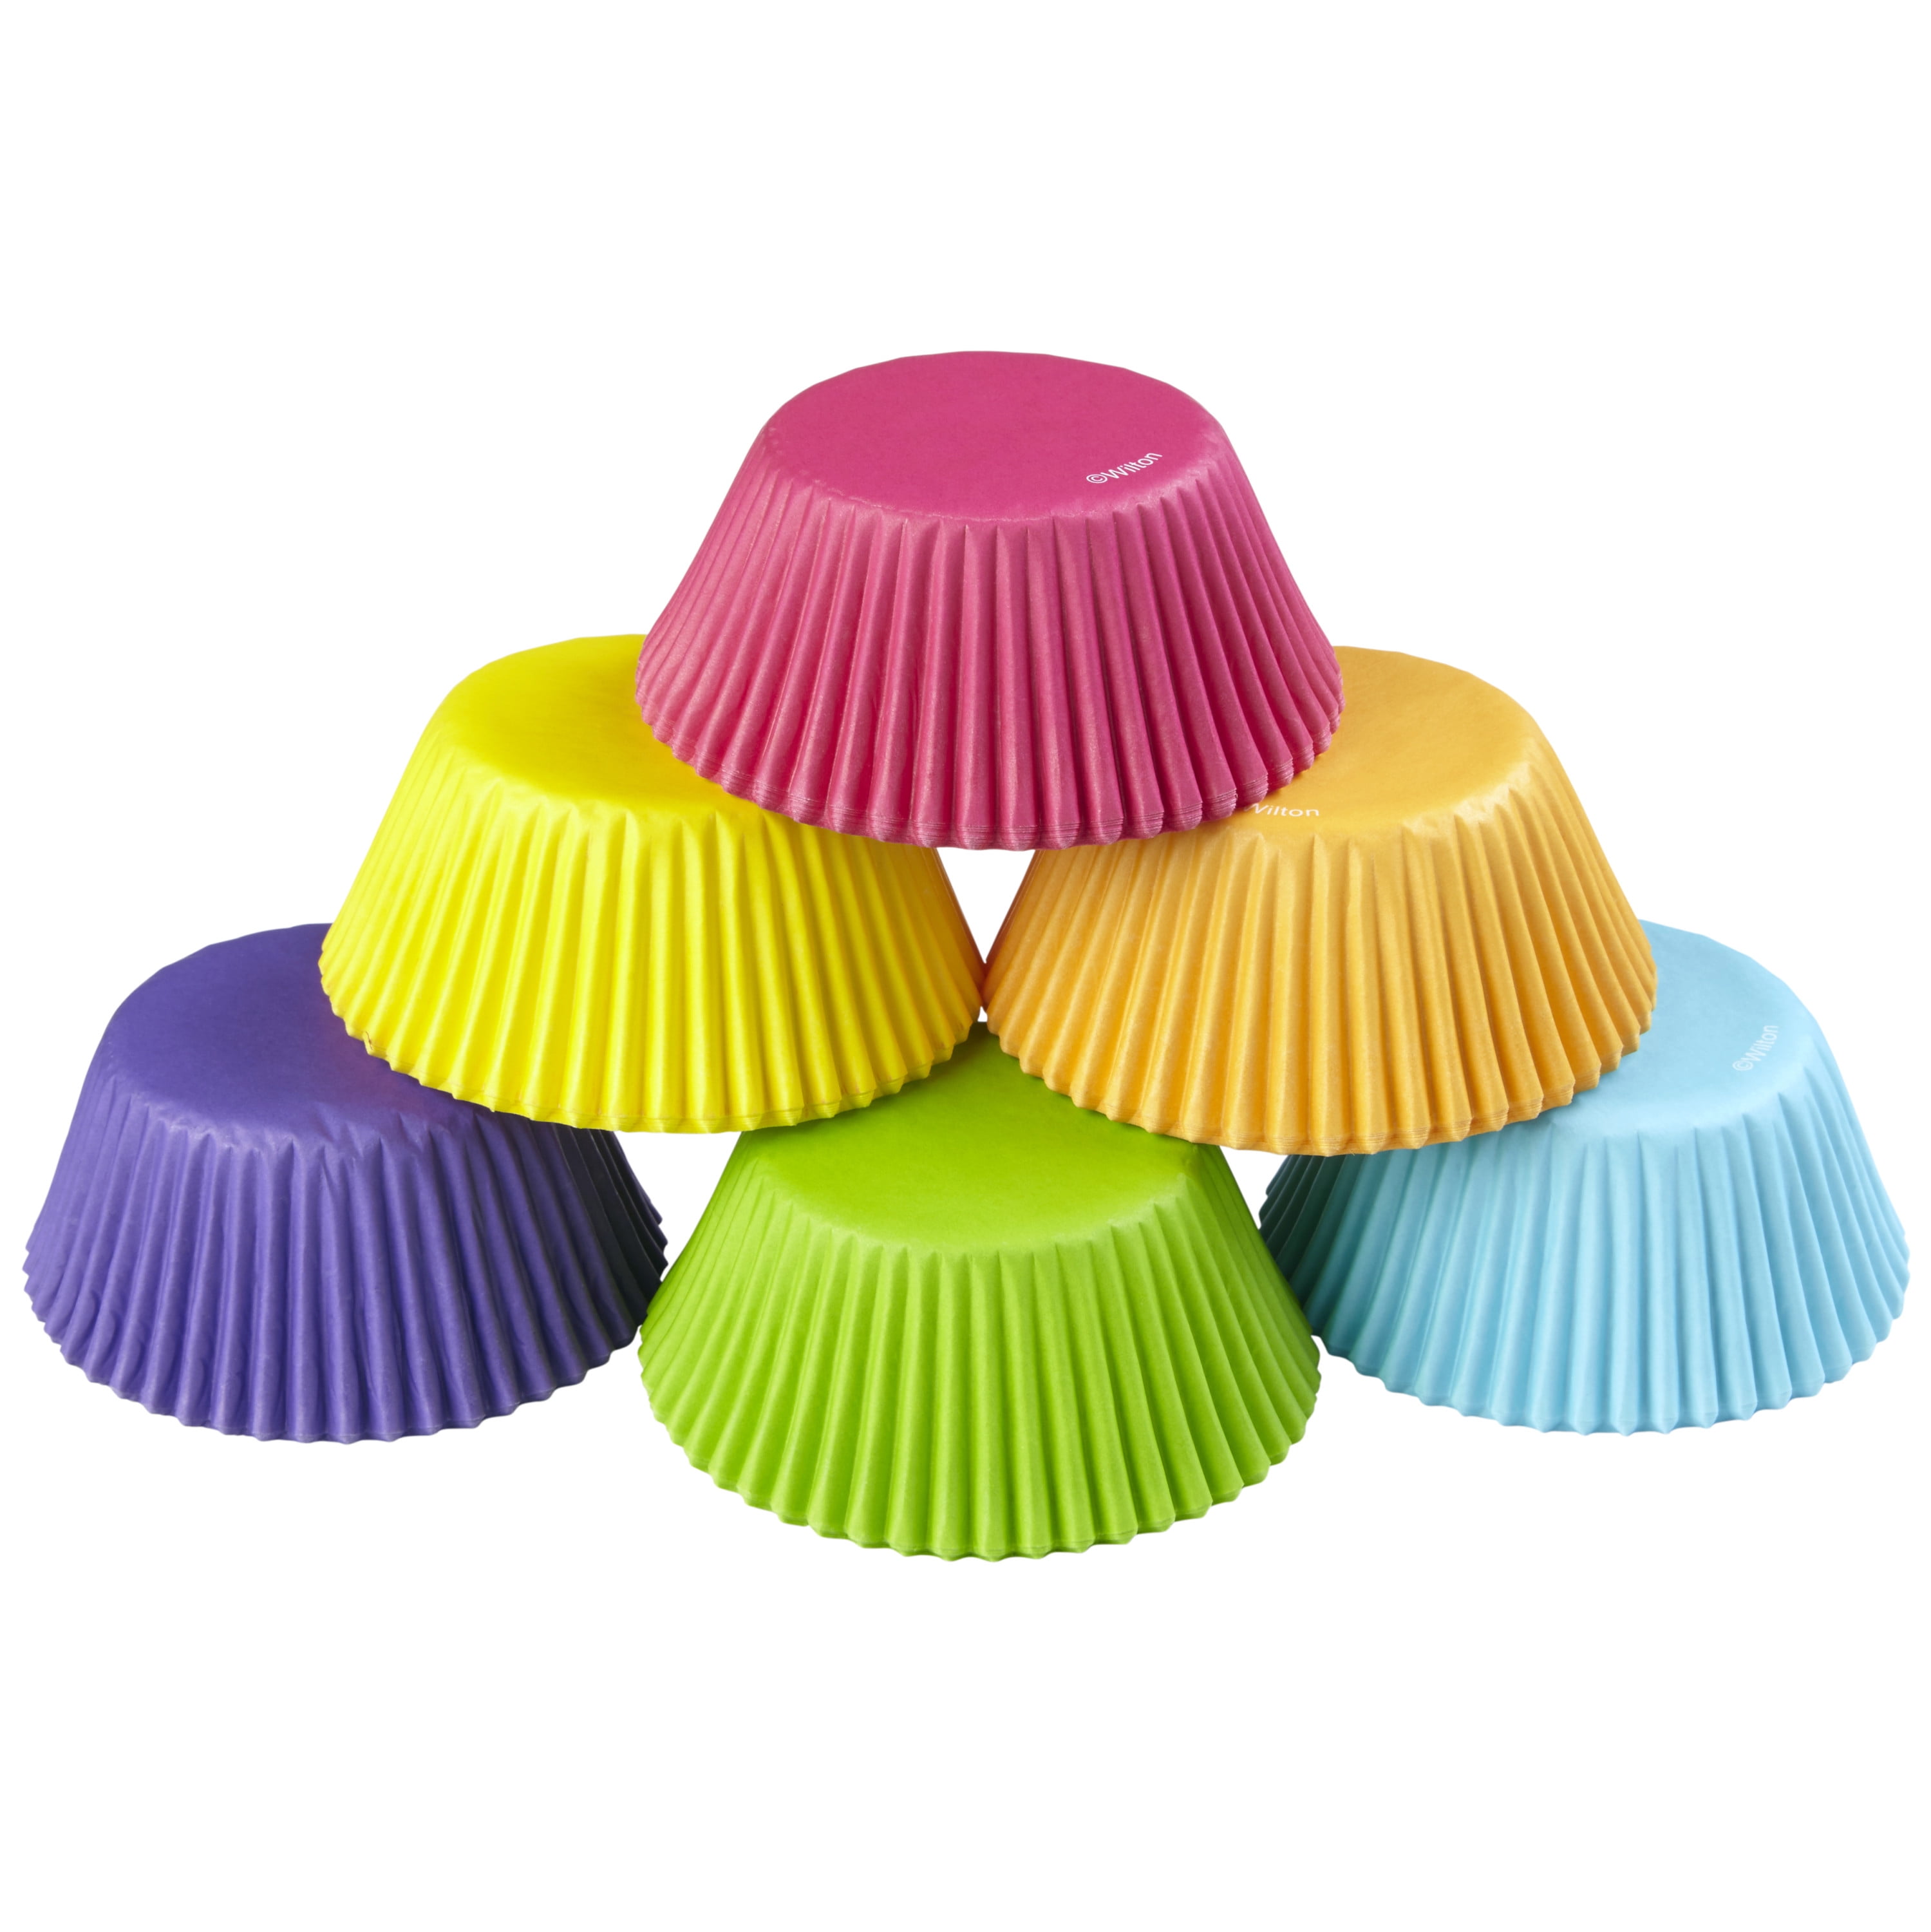 Flower Silicone Cupcake Liners - Set of 12 – US ONLINE STORE